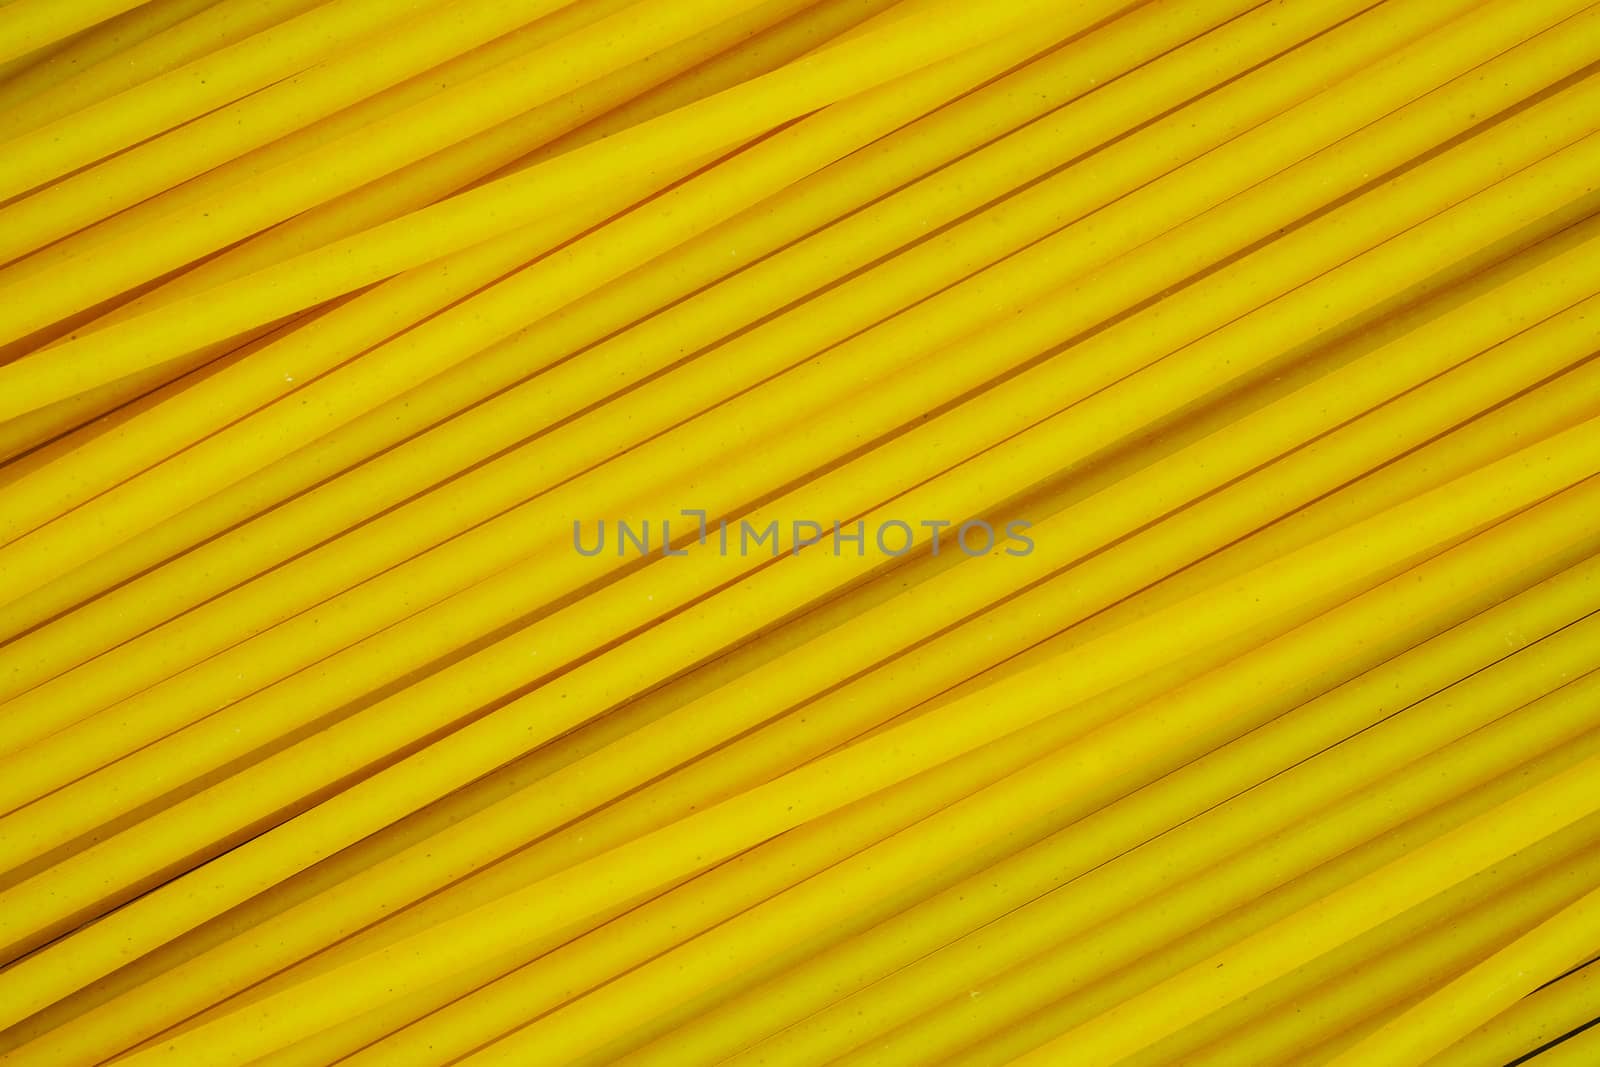 pattern and form of ordinary pasta